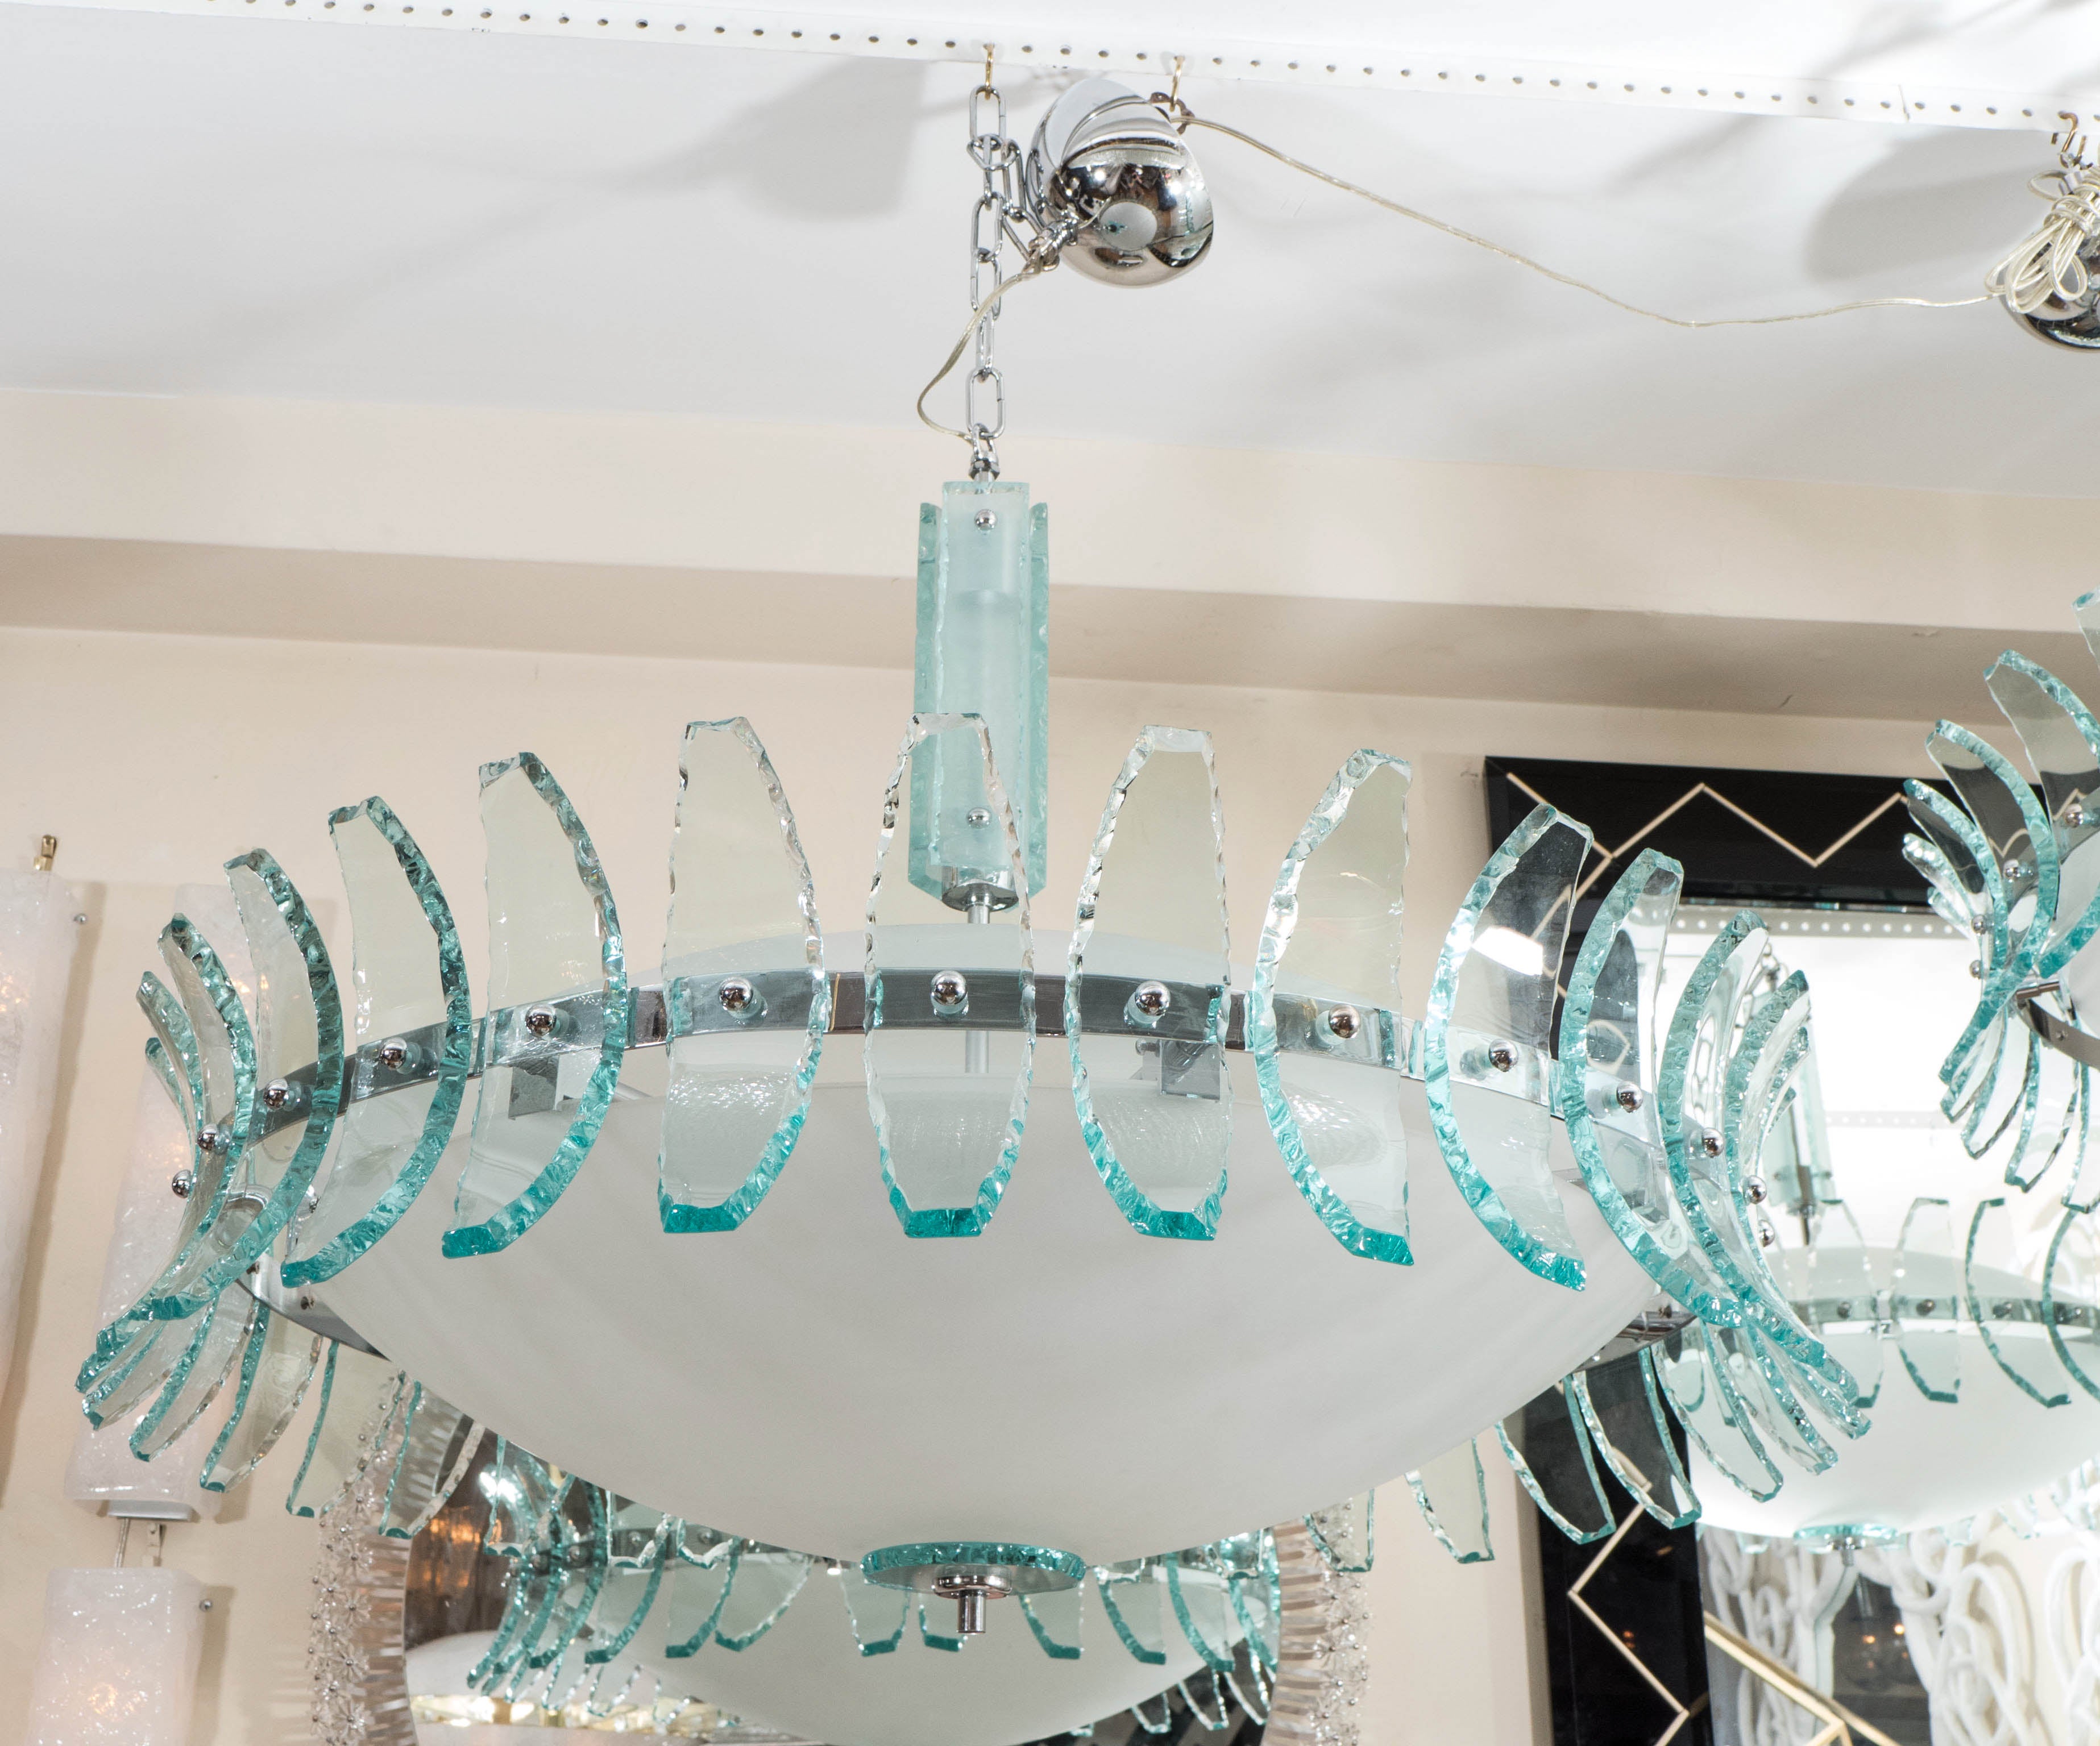 Large-Scale Frosted Glass Chandelier